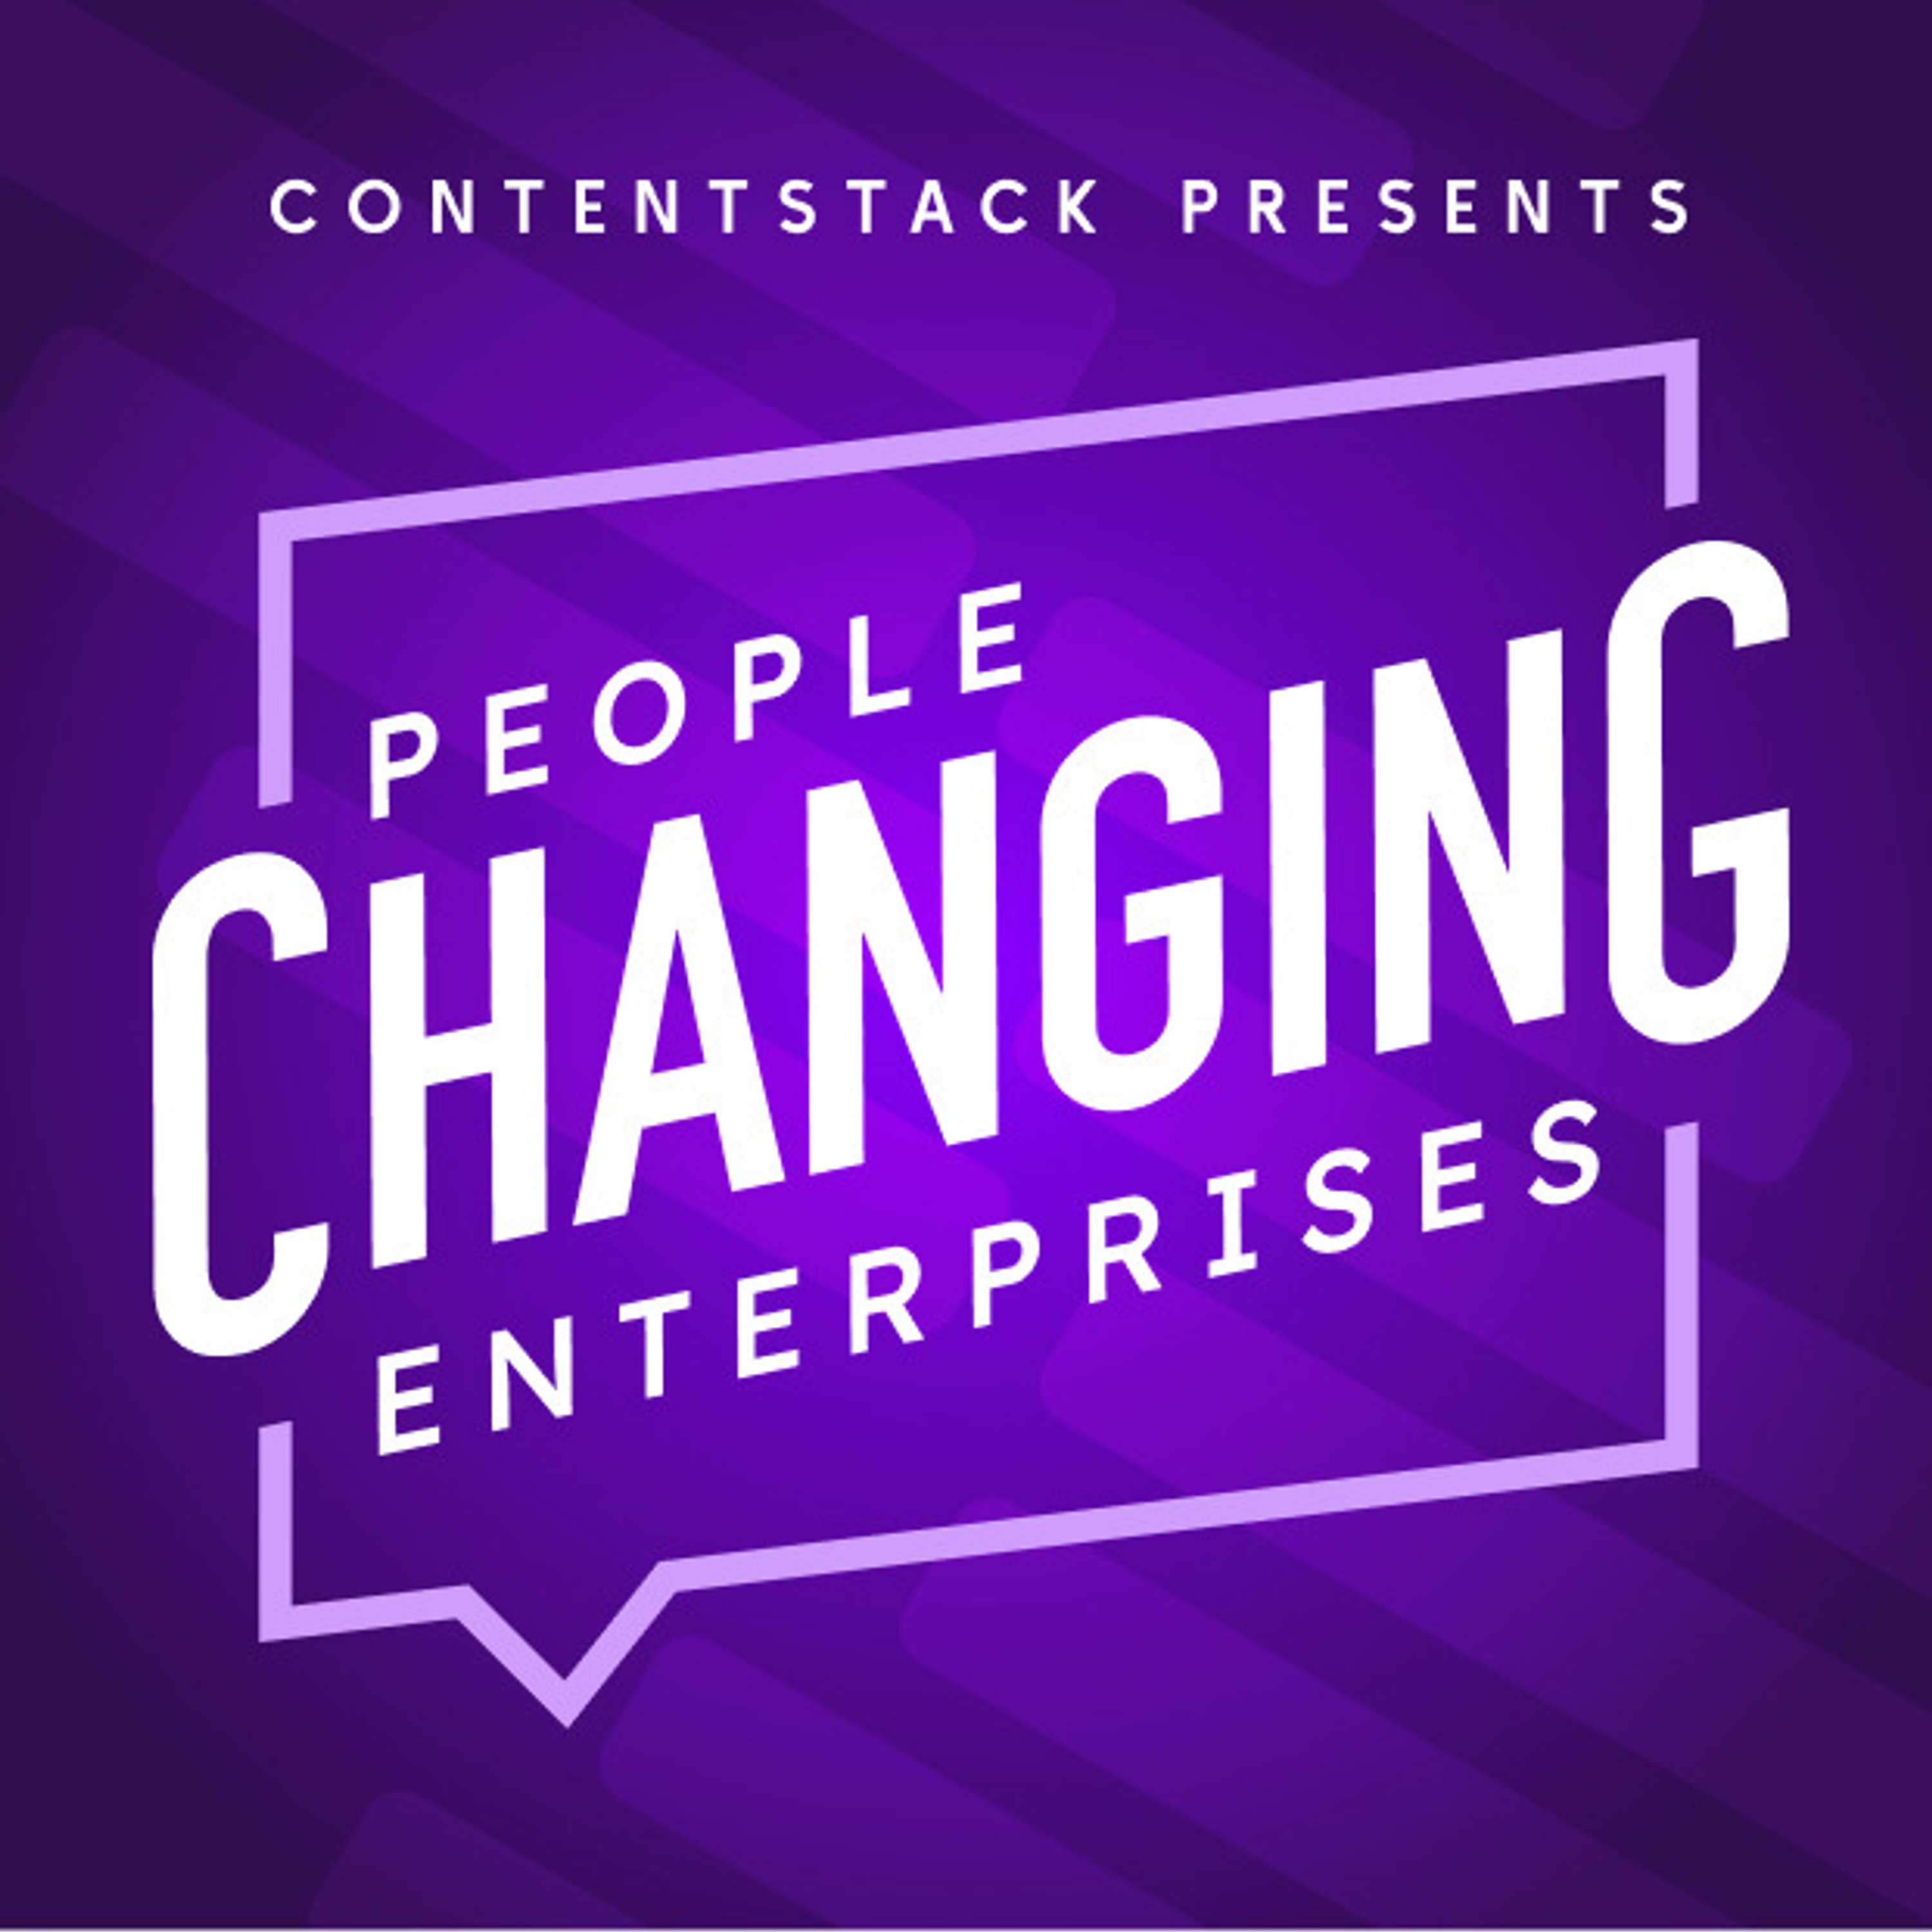 People Changing Enterprises: Toolkit for Becoming a Change-Maker, with CEO, CTO, investor Danielle Diliberti